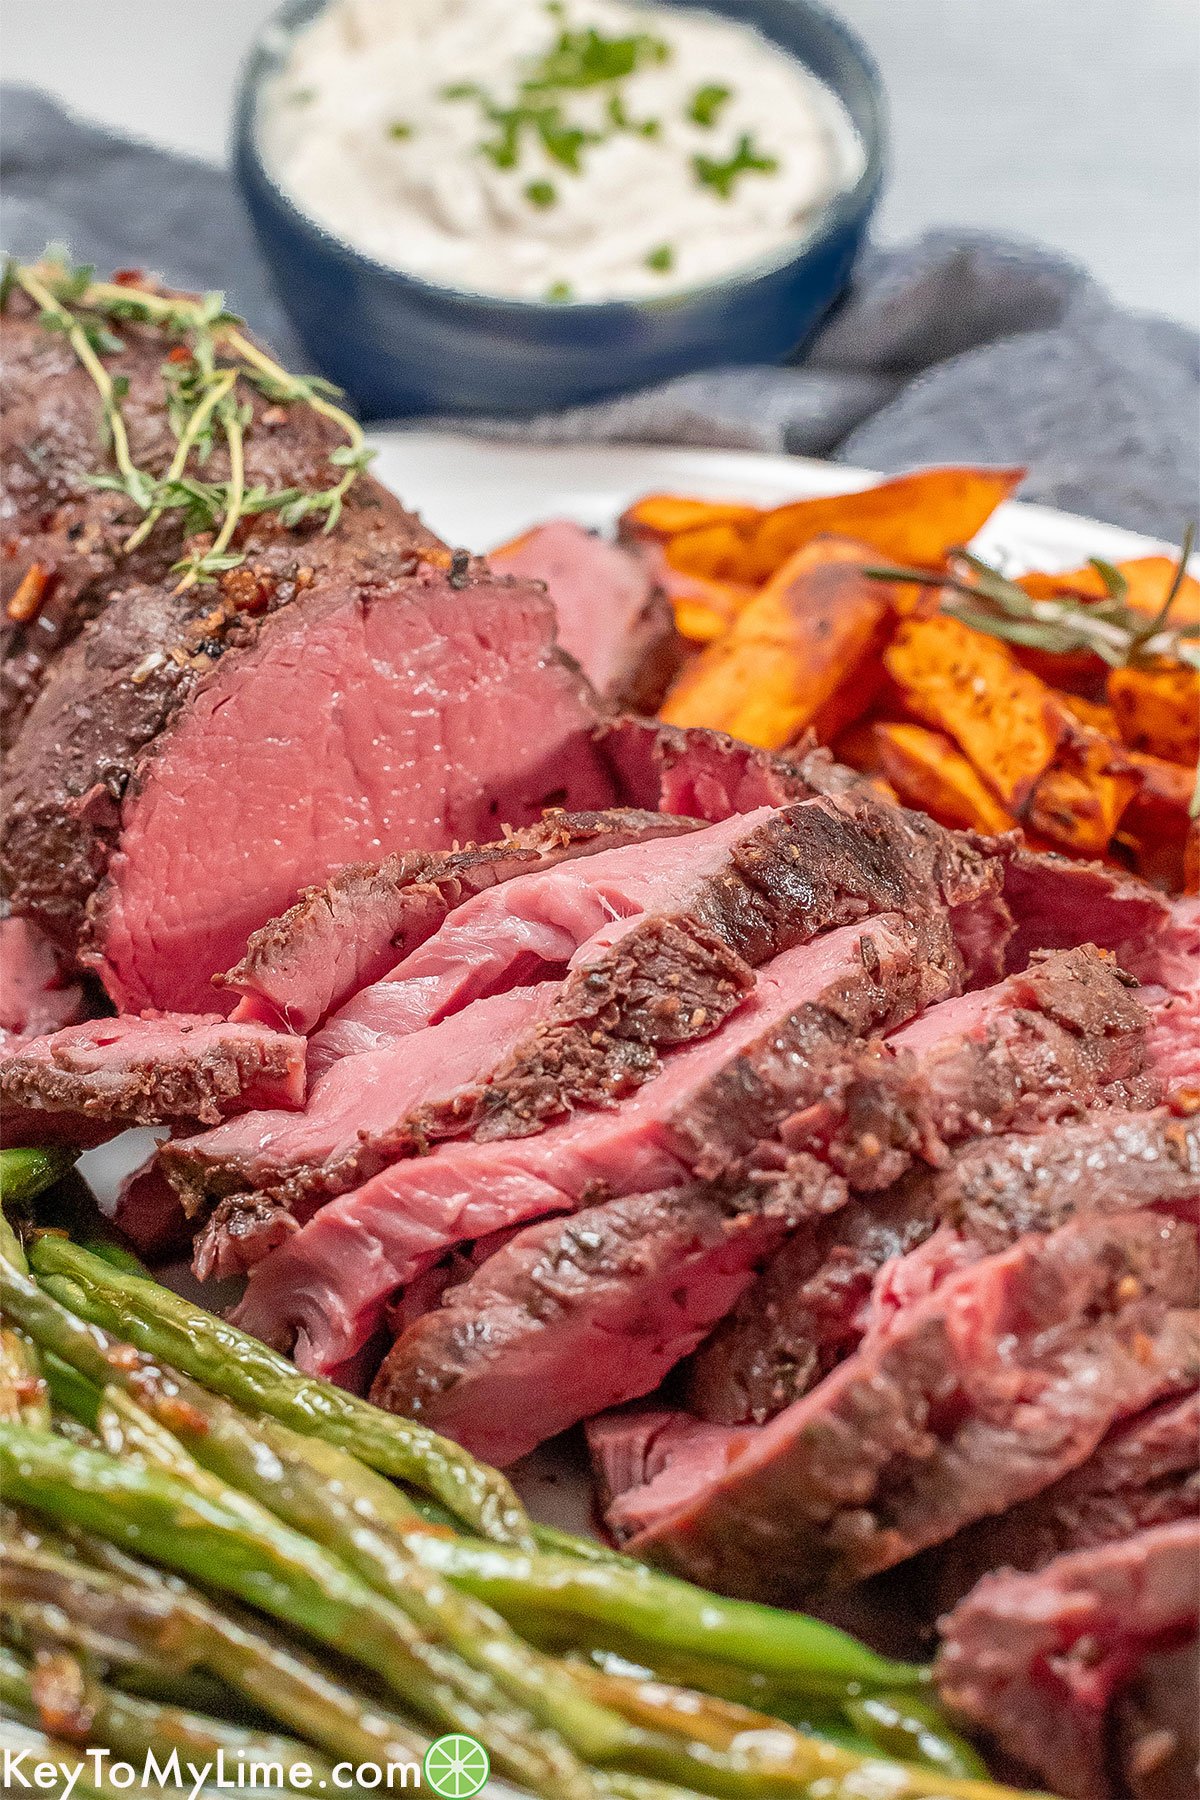 A side image of a partially sliced beef tenderloin next to a serving of green beans and sweet potatoes.